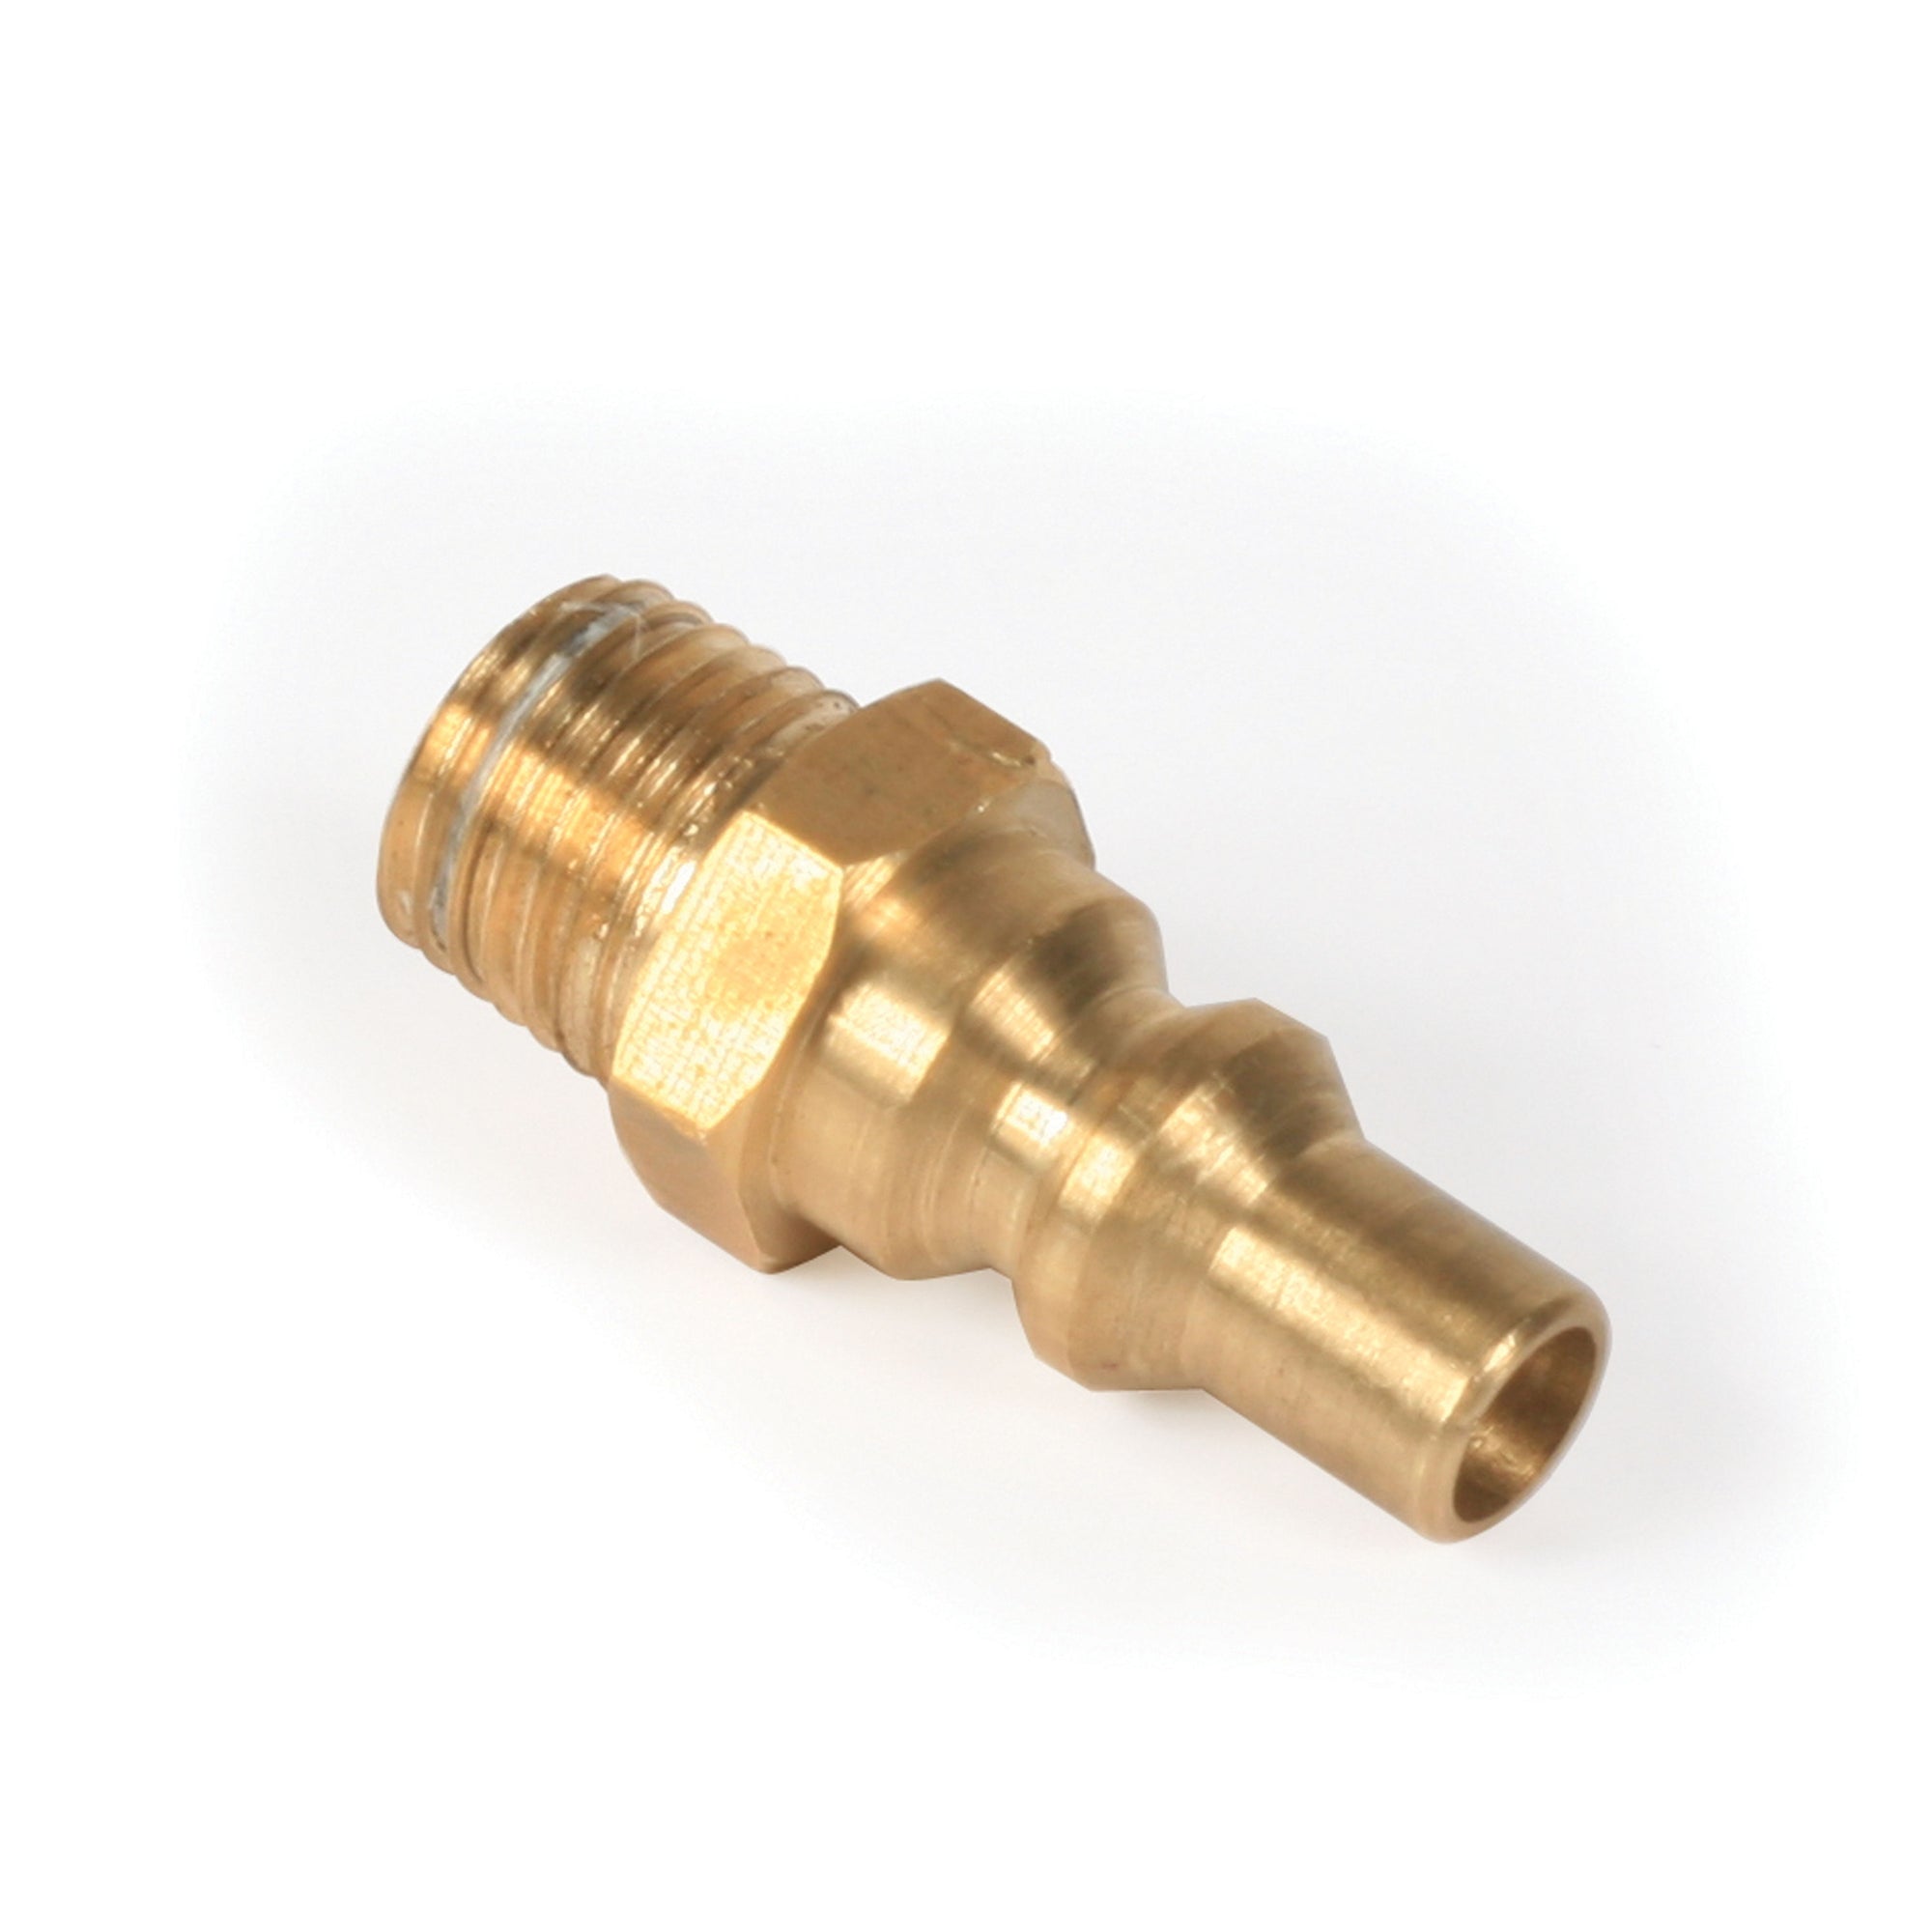 Camco 59903 1/4" Male NPT x Male Male Quick-Connect Plug for Low Pressure Quick-Connect Valve